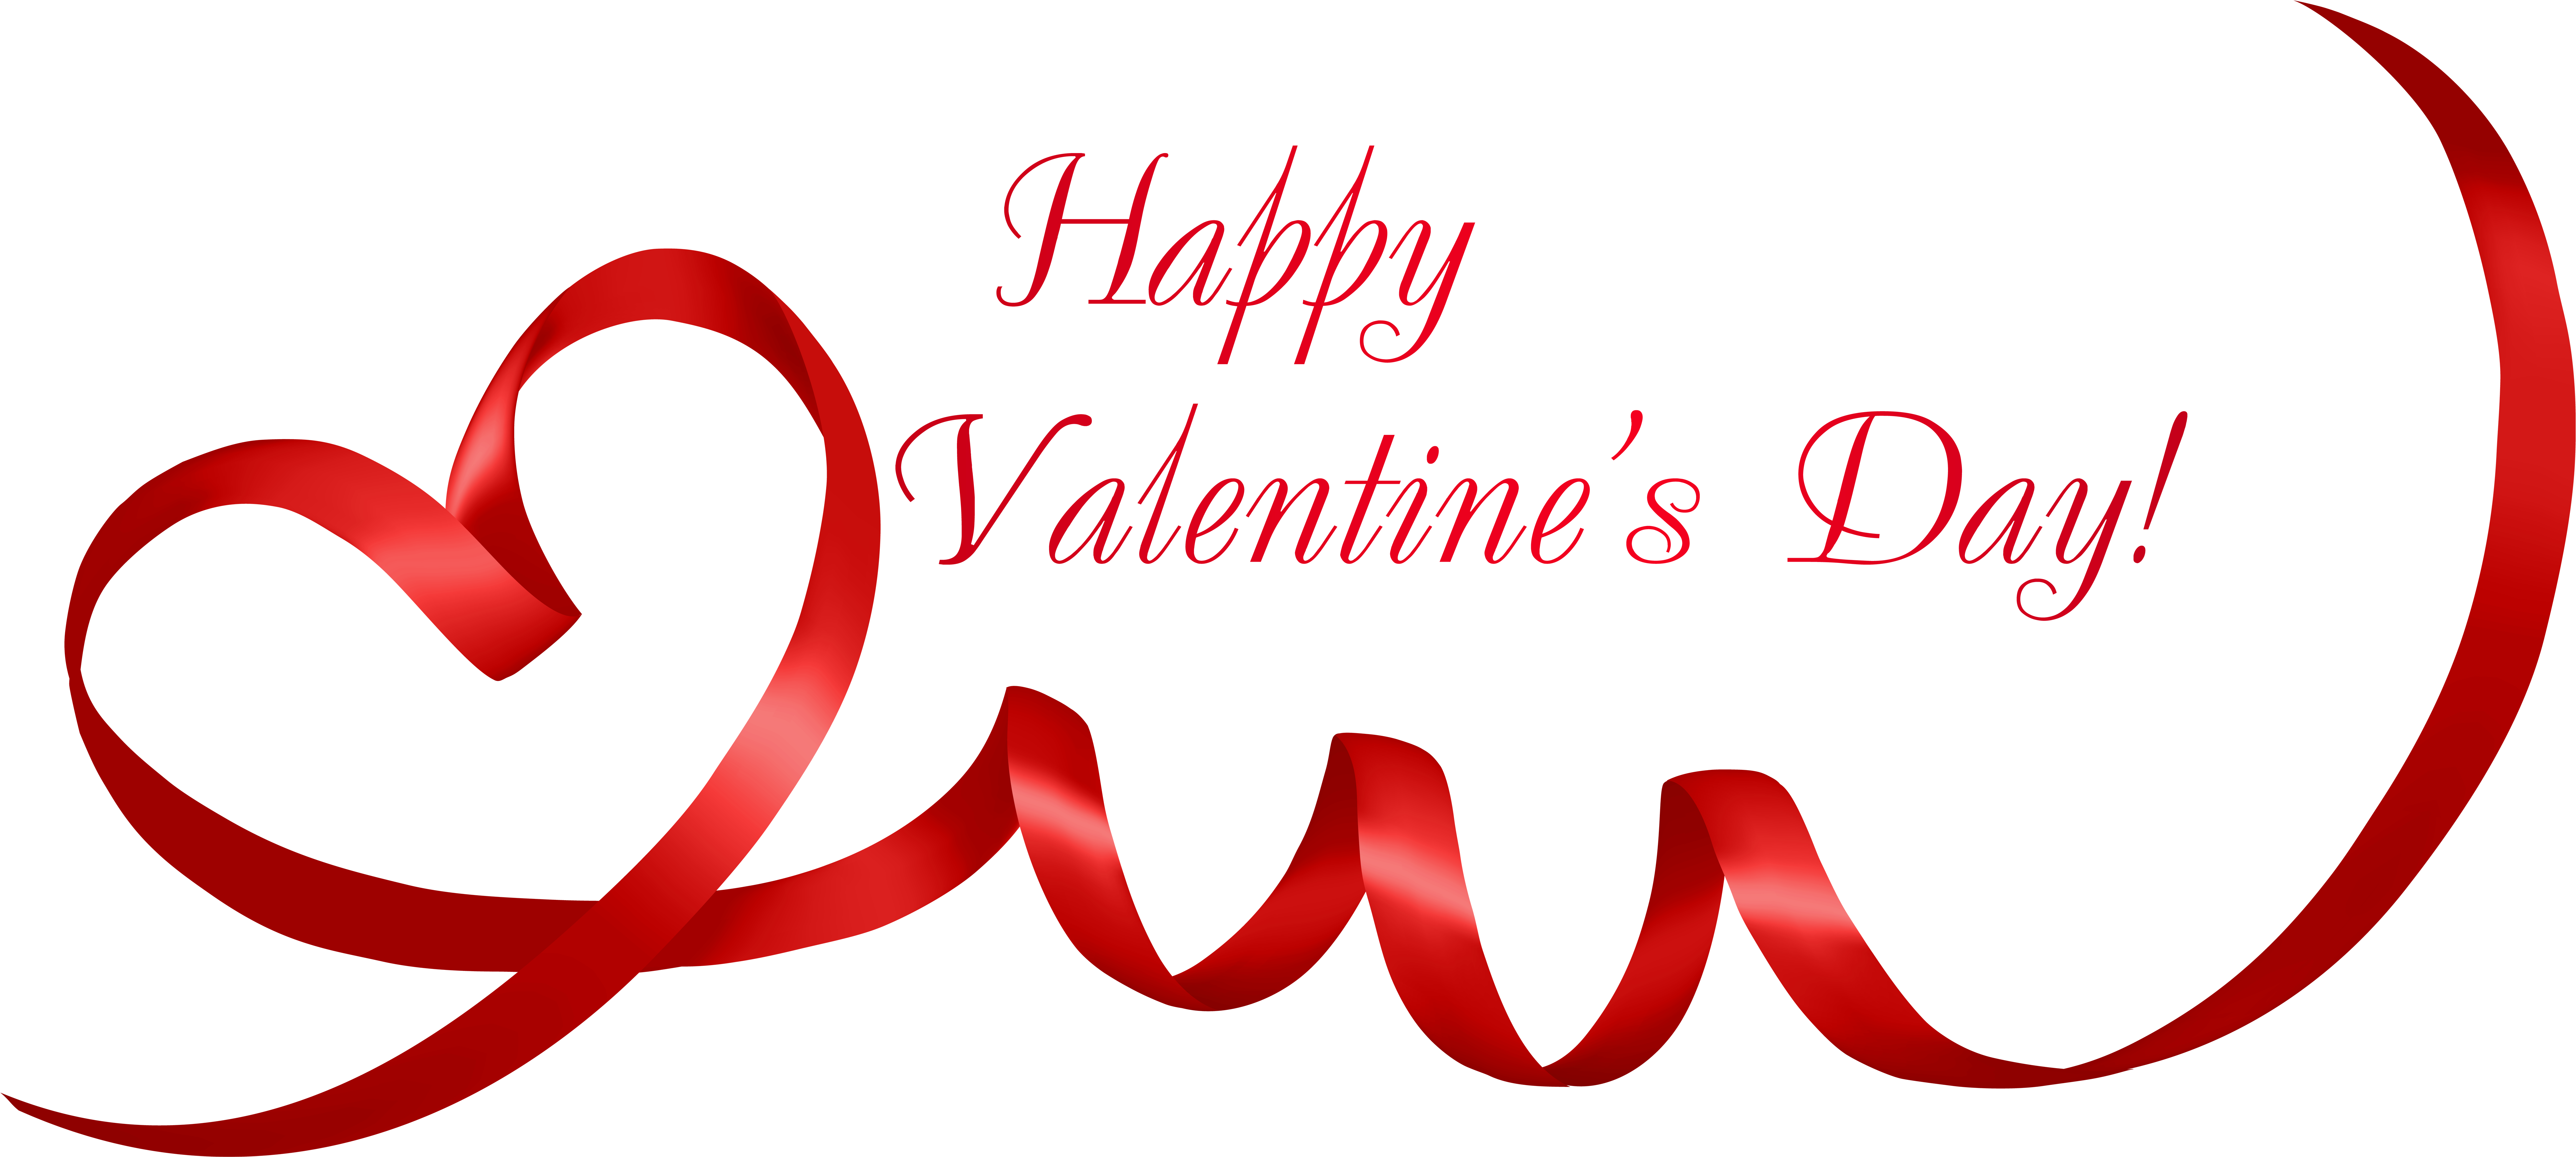 6 61775 Valentines Day Clipart 